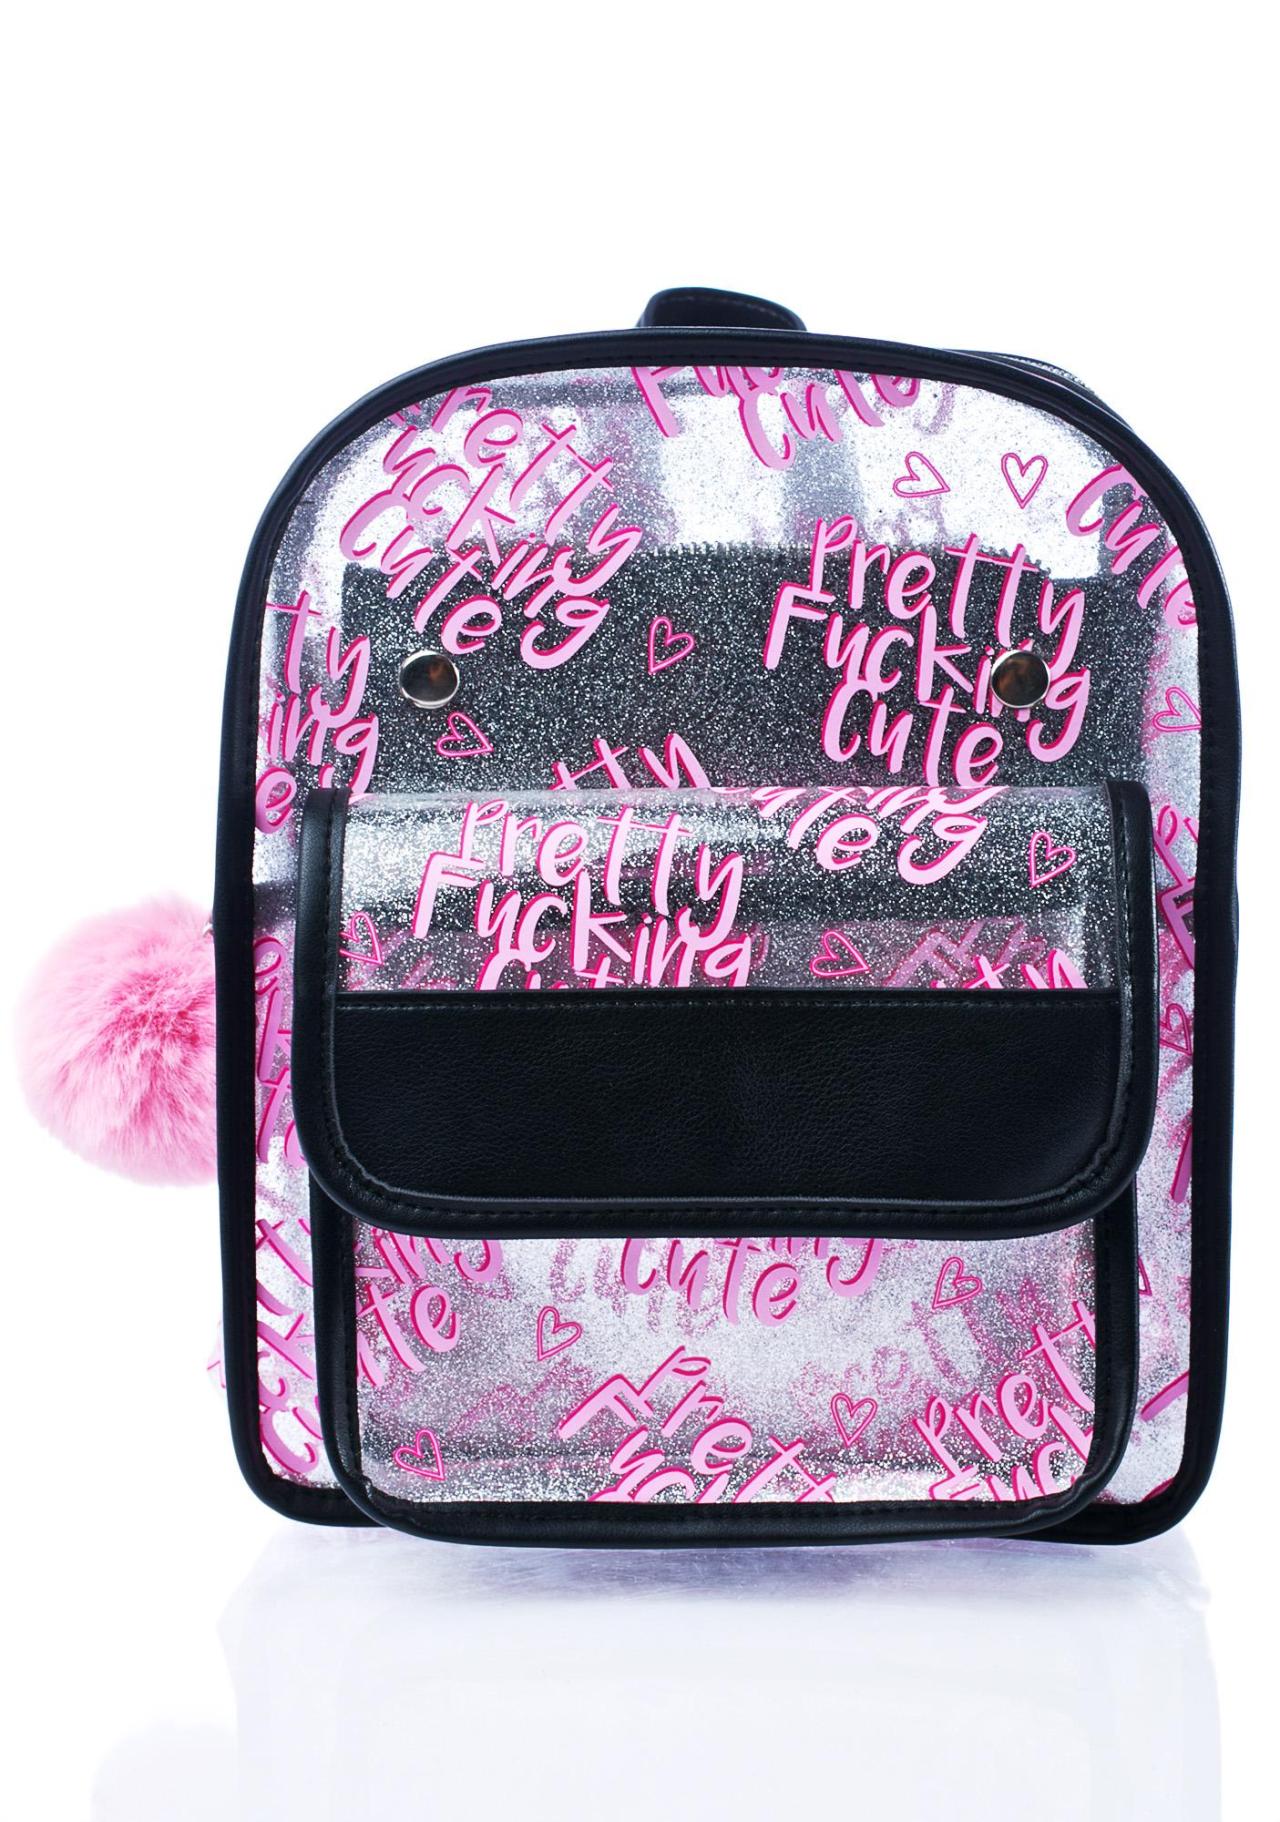 snowwhite-blushpink:  thelosersshoppingguide:  Pretty Fucking Cute Backpack  really,